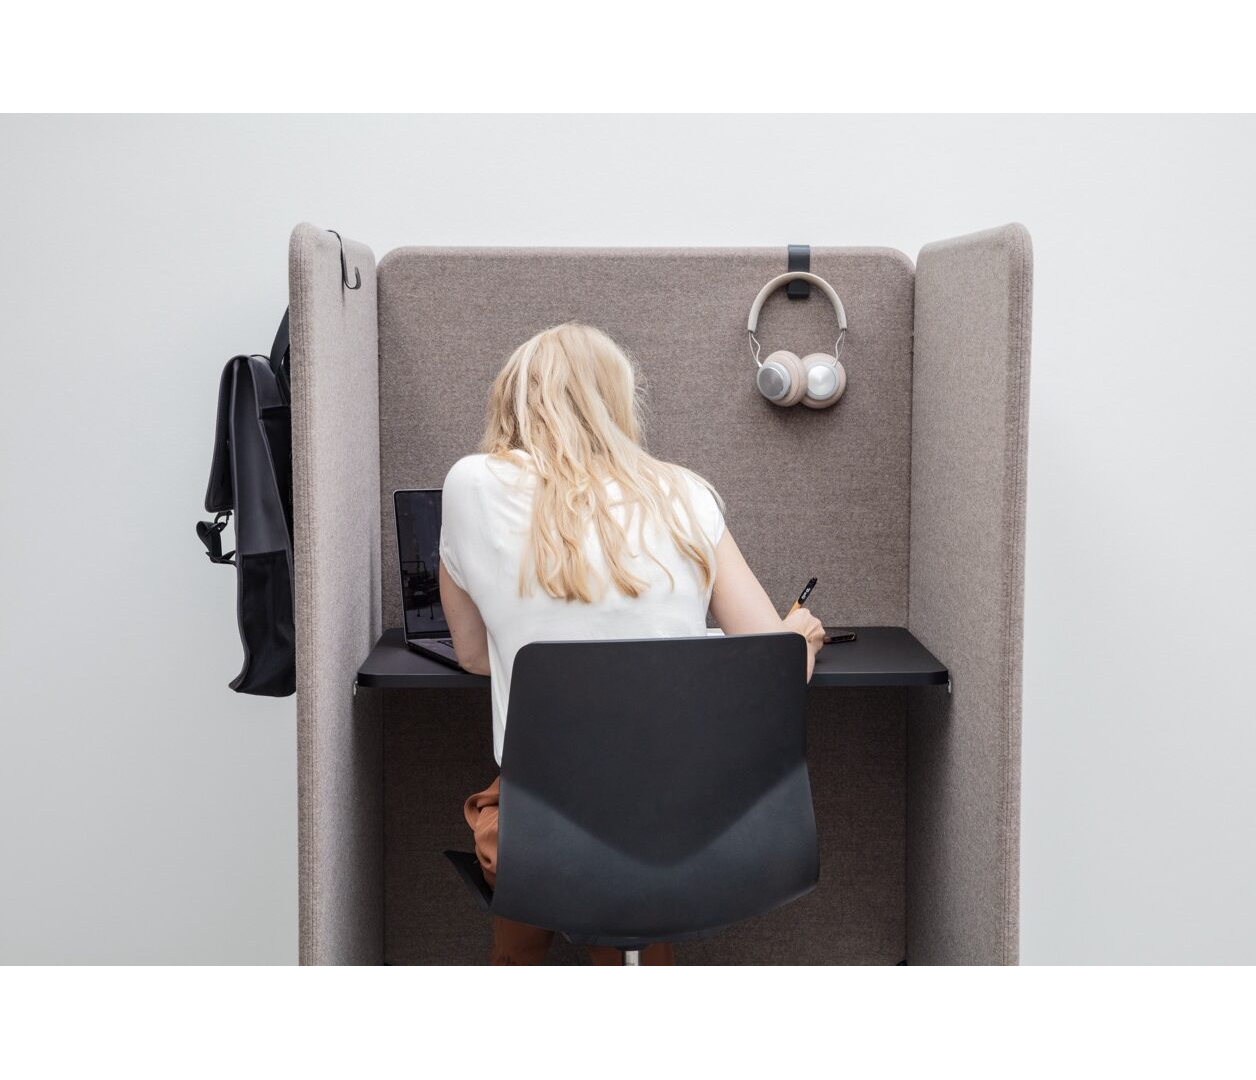 OCEE&FOUR – Work & Study Booths – FourPeople Study Booth – Lifestyle Image 2 Large